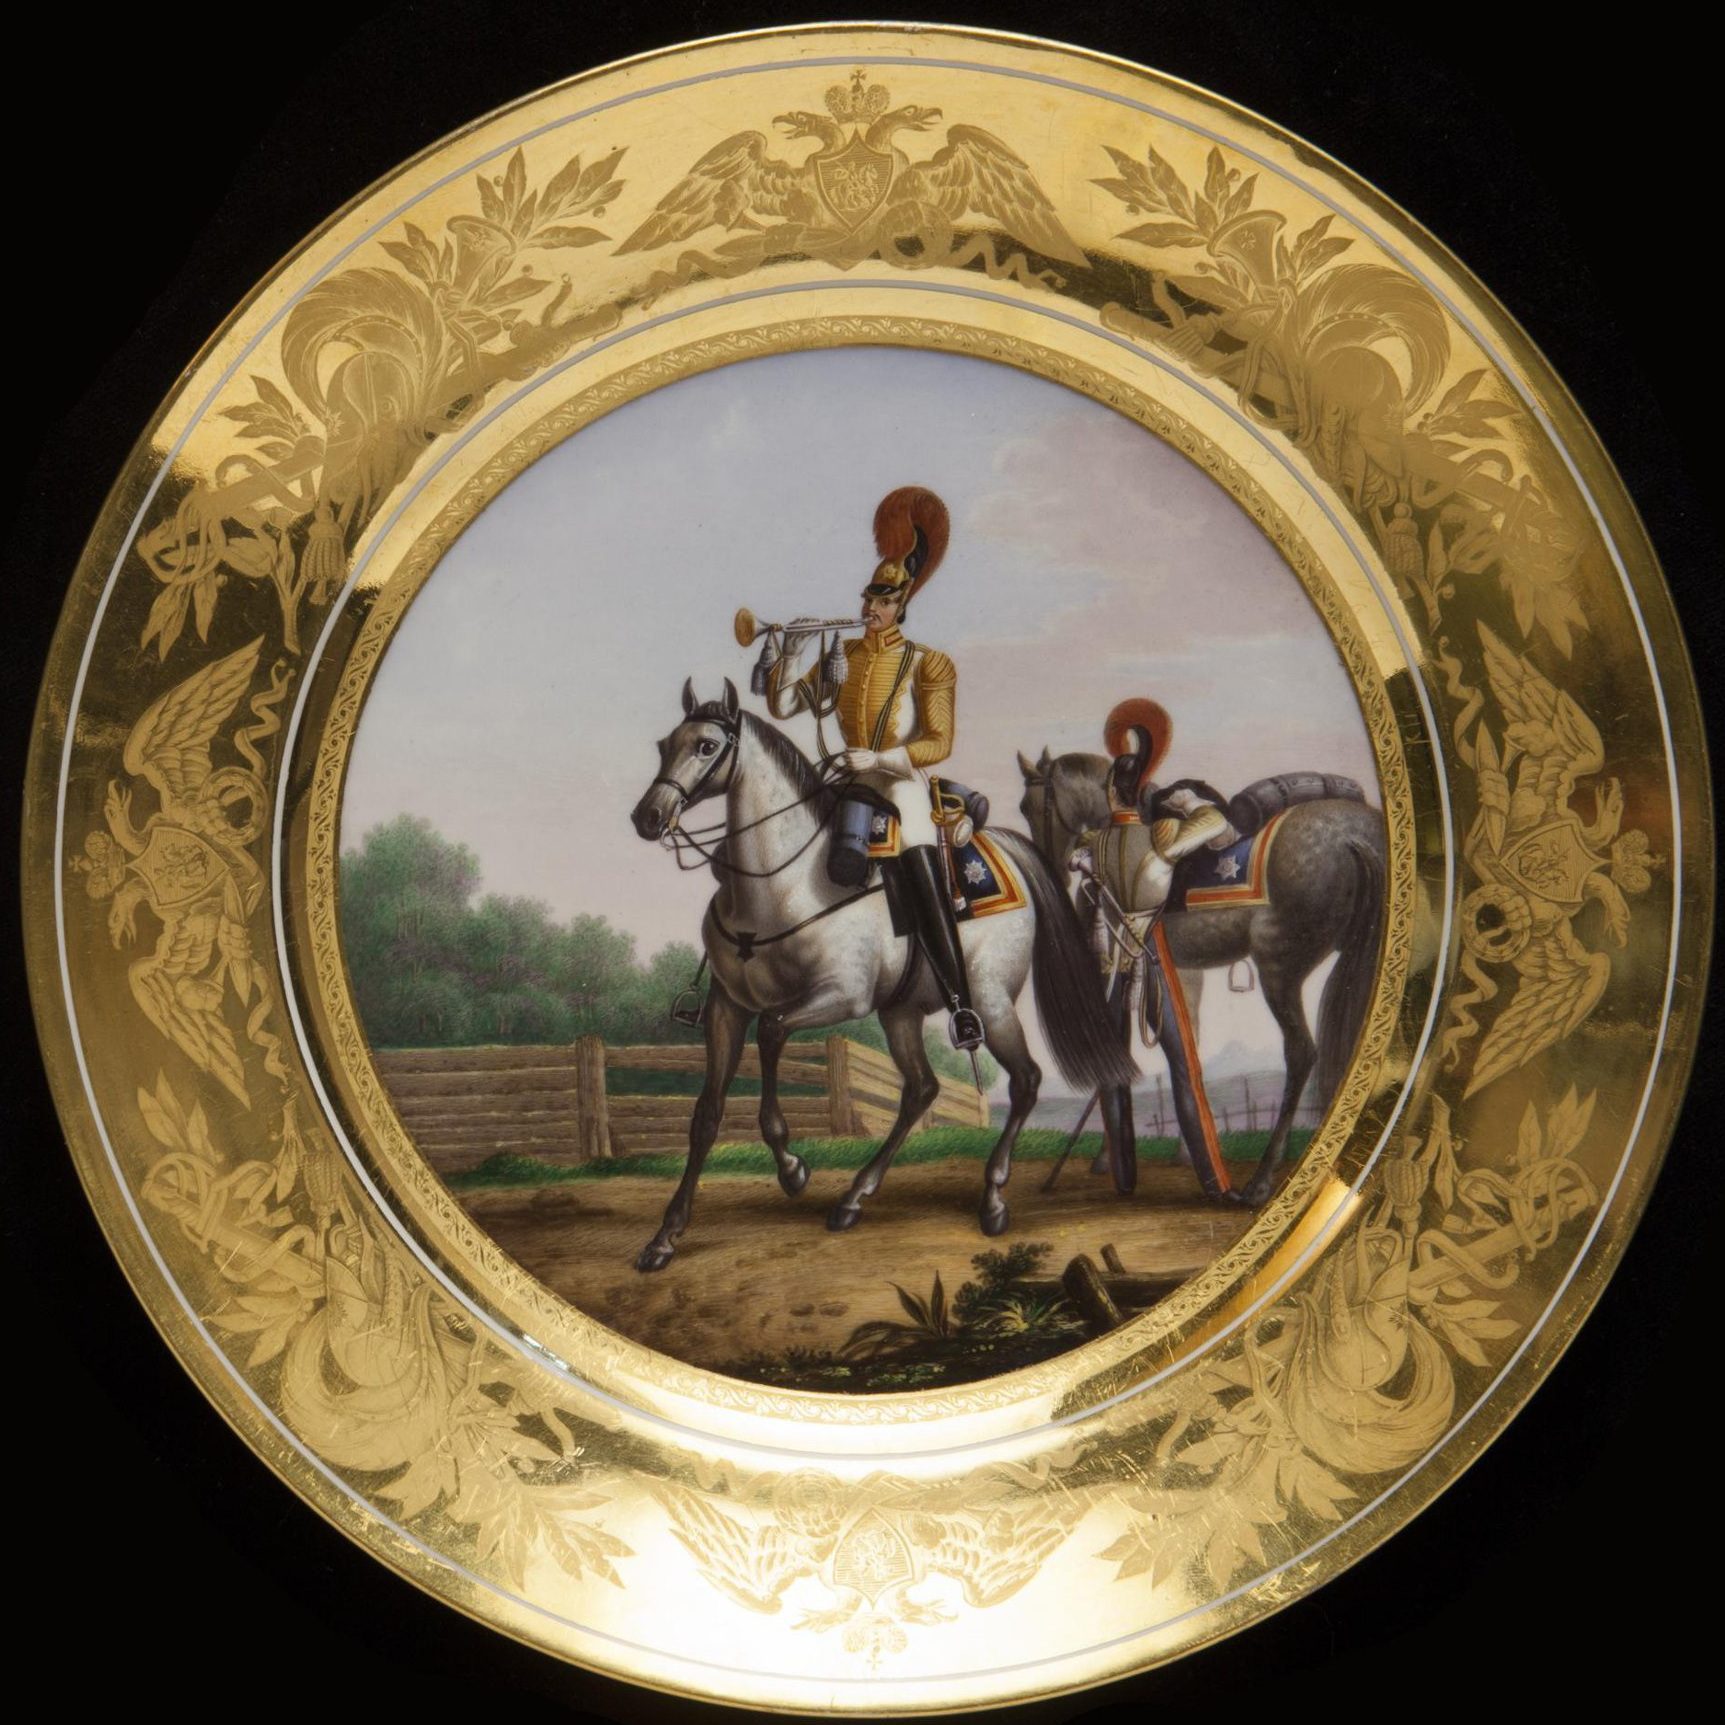 Russian Imperial Porcelain military plate depicting the trumpeter of Life-Guard Horse Regiment 1829